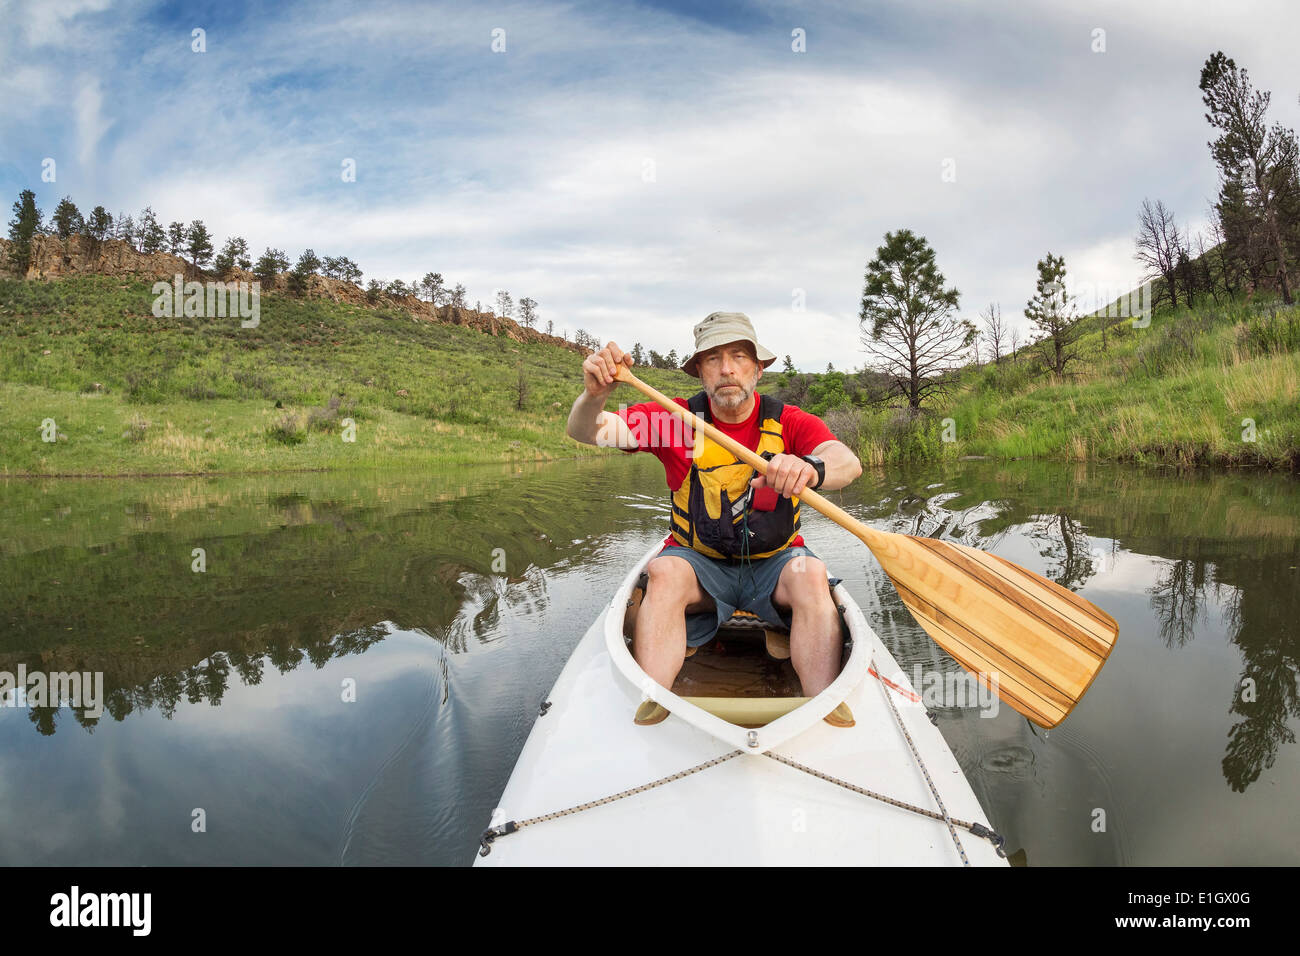 senior athletic paddler in a decked expedition canoe on a lake with green vegetation Stock Photo